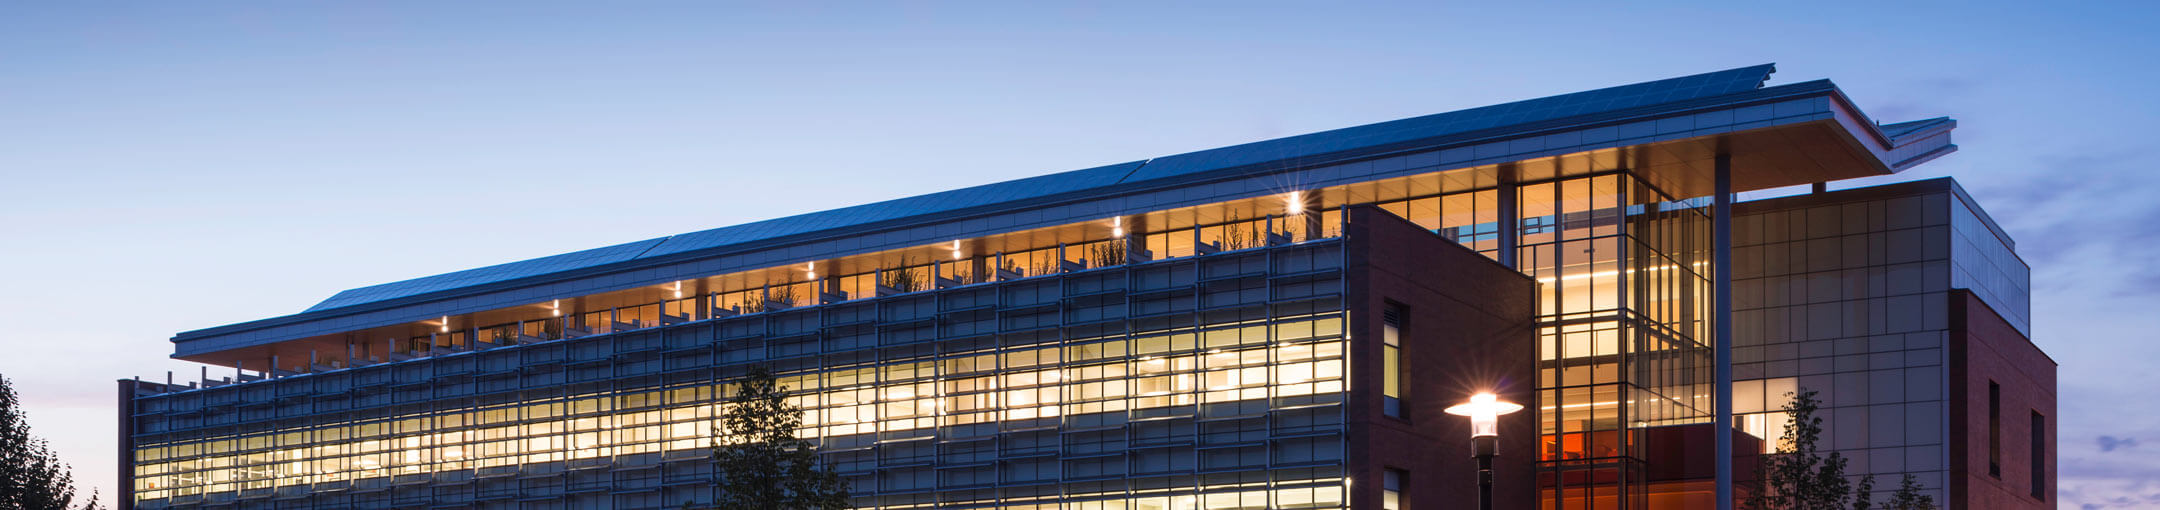 Exterior view of the Golisano Institute for Sustainability at dusk